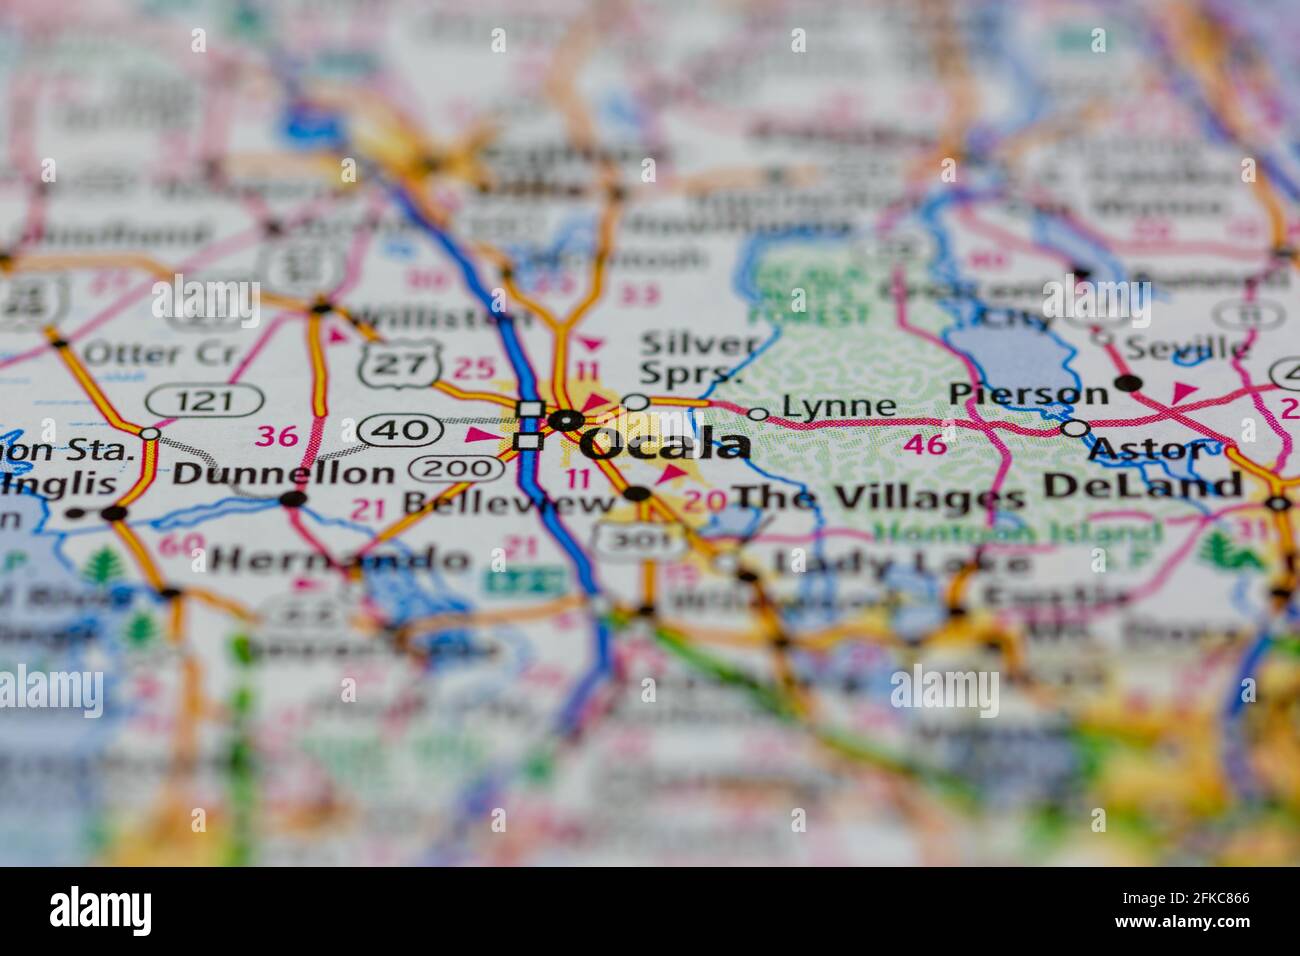 Ocala Florida USA Shown on a geography map or road map Stock Photo